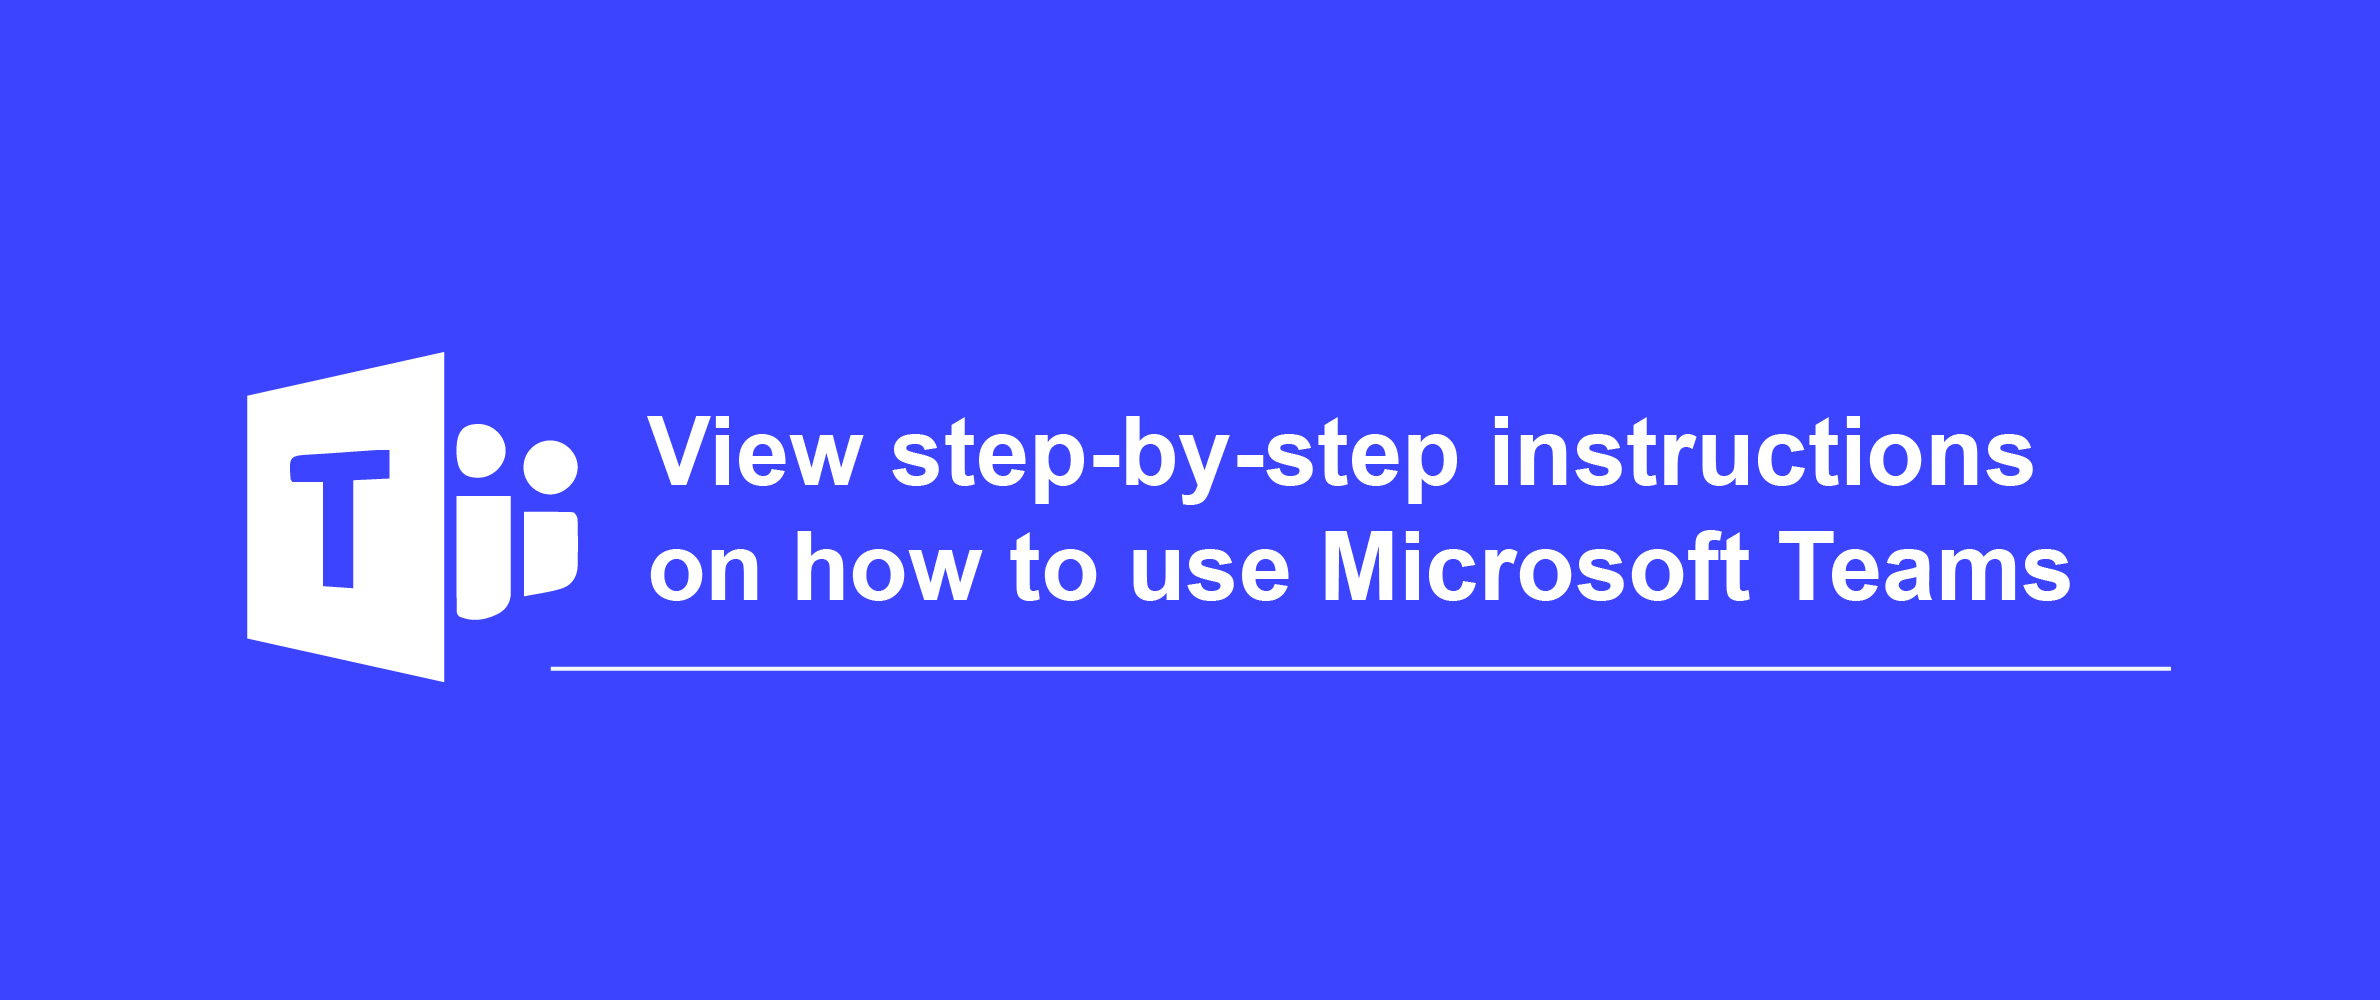 View step-by-step instructions on how to use Microsoft Teams